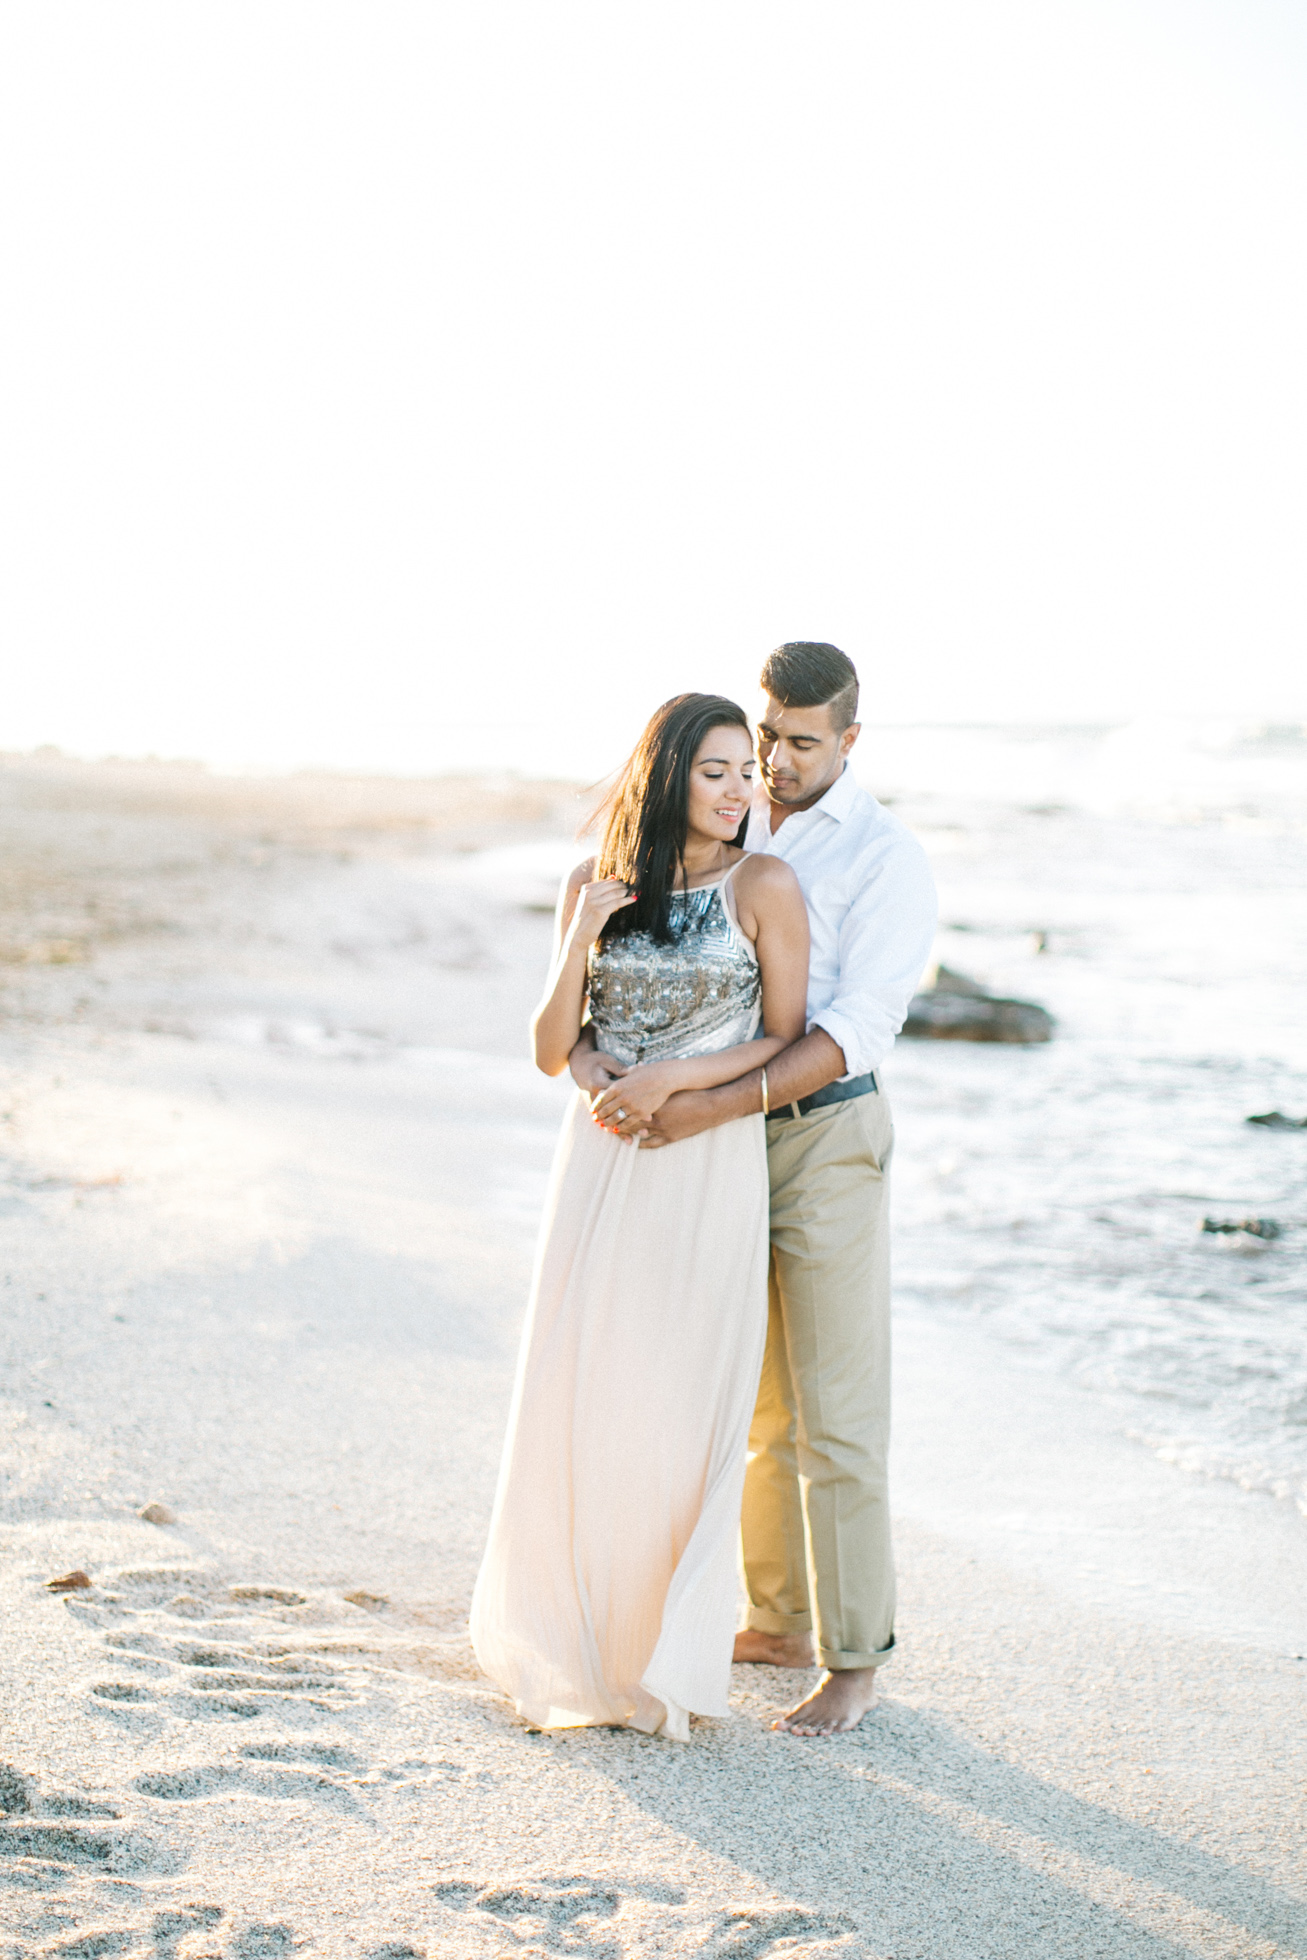 Engaged couple posing on the beach in Crete during their pre wedding engagement photosession at sunset.